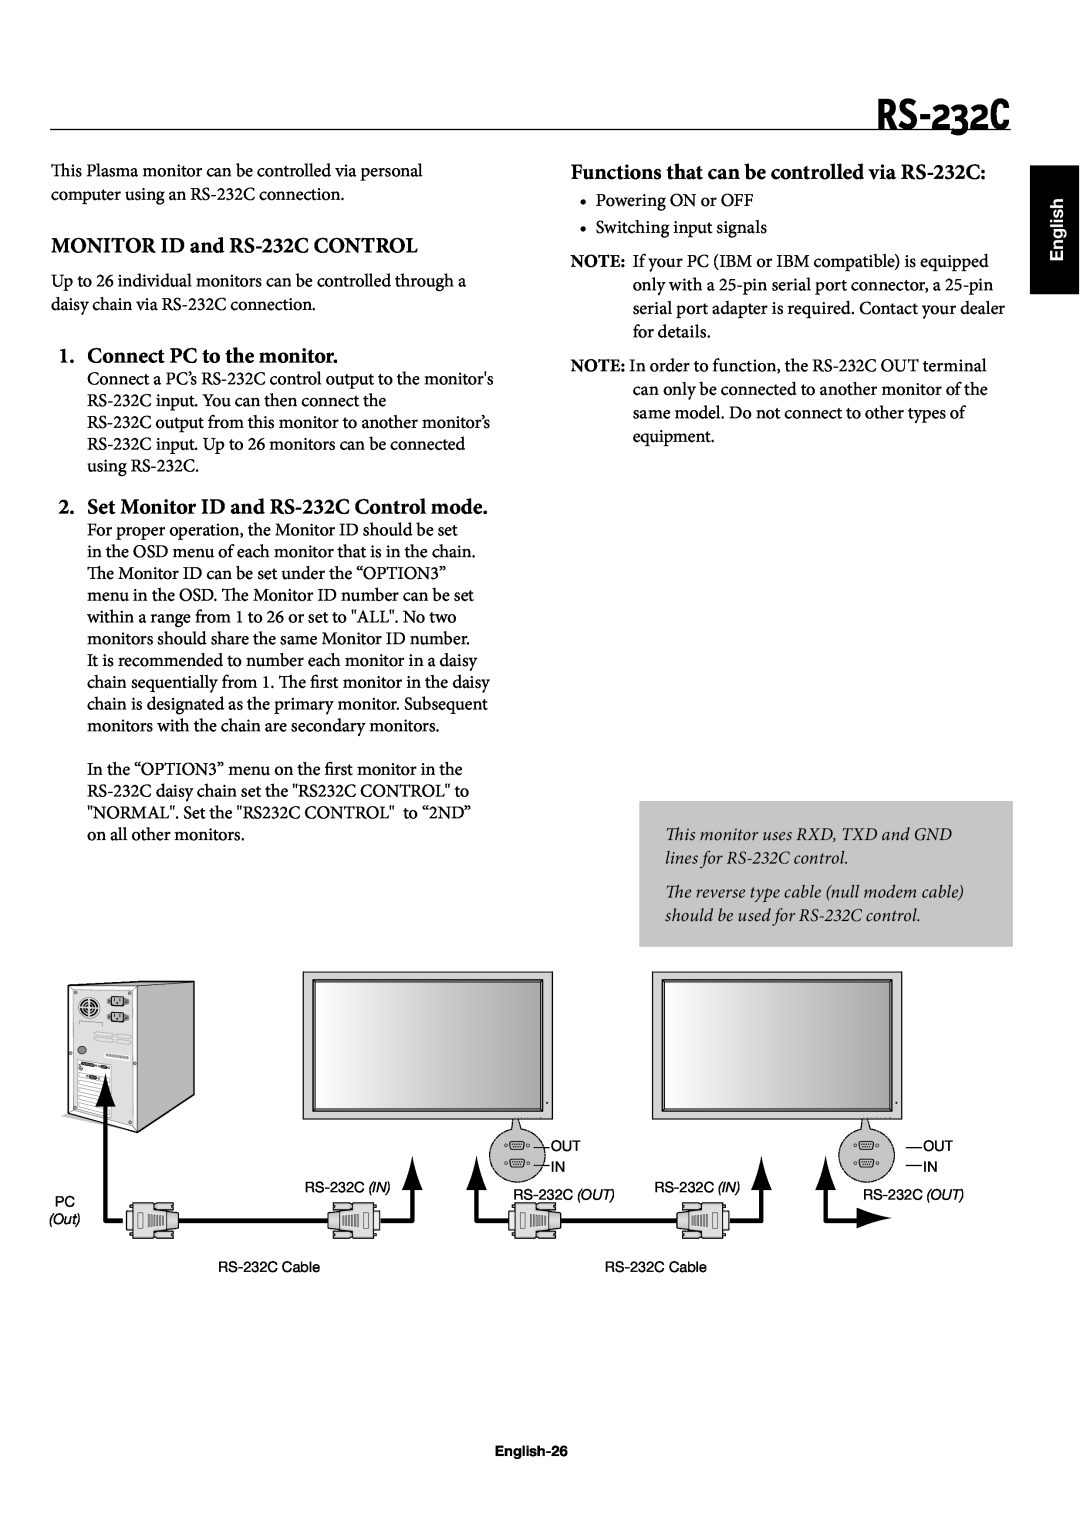 NEC 60XP10 MONITOR ID and RS-232C CONTROL, Functions that can be controlled via RS-232C, Connect PC to the monitor 